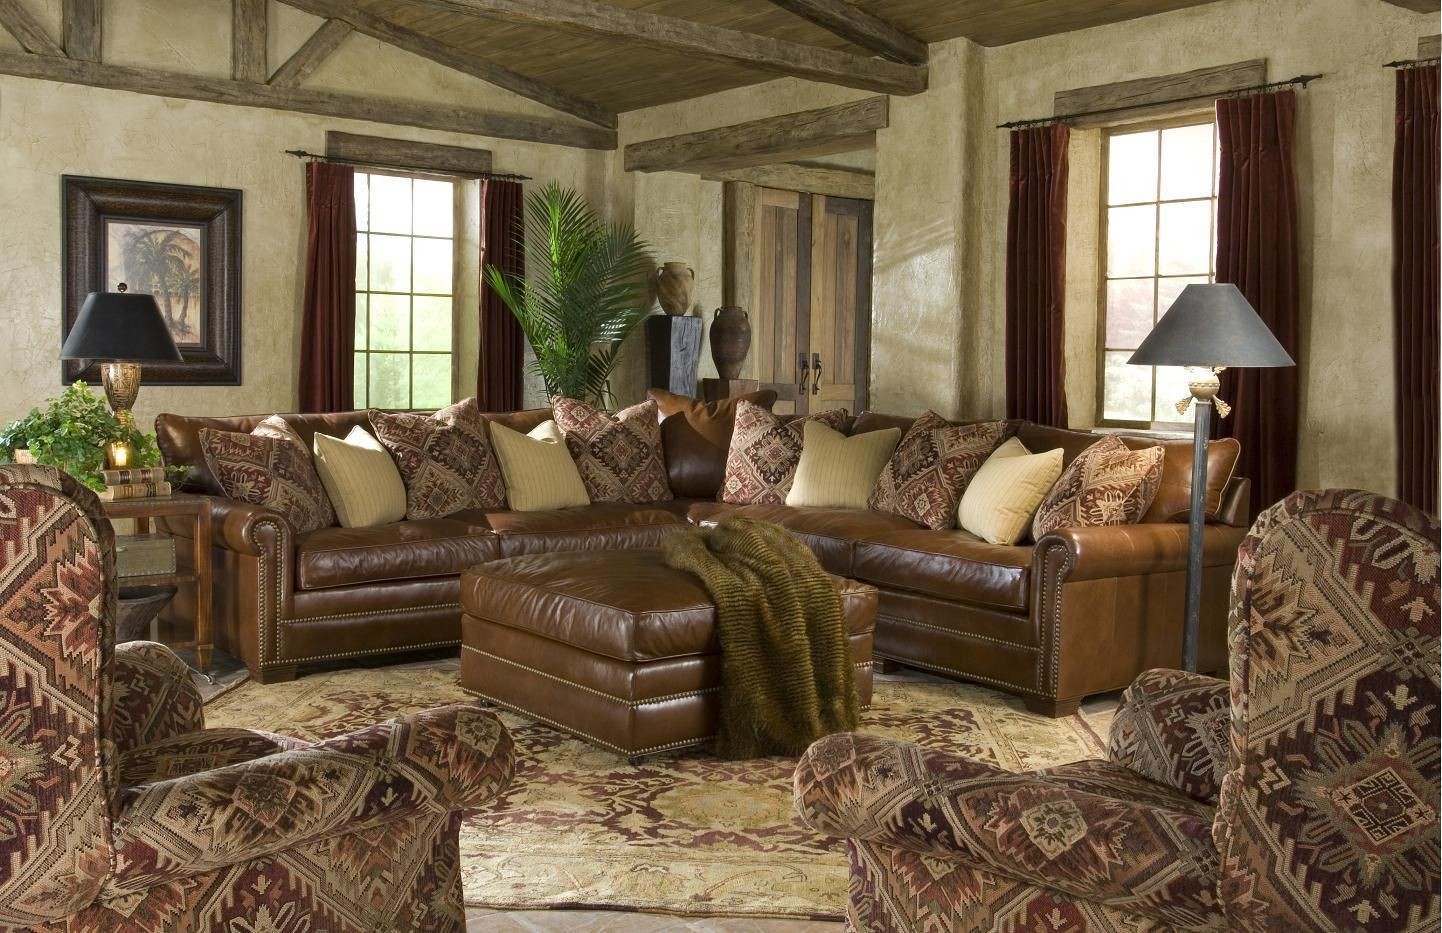 Old world living room design google search relaxing